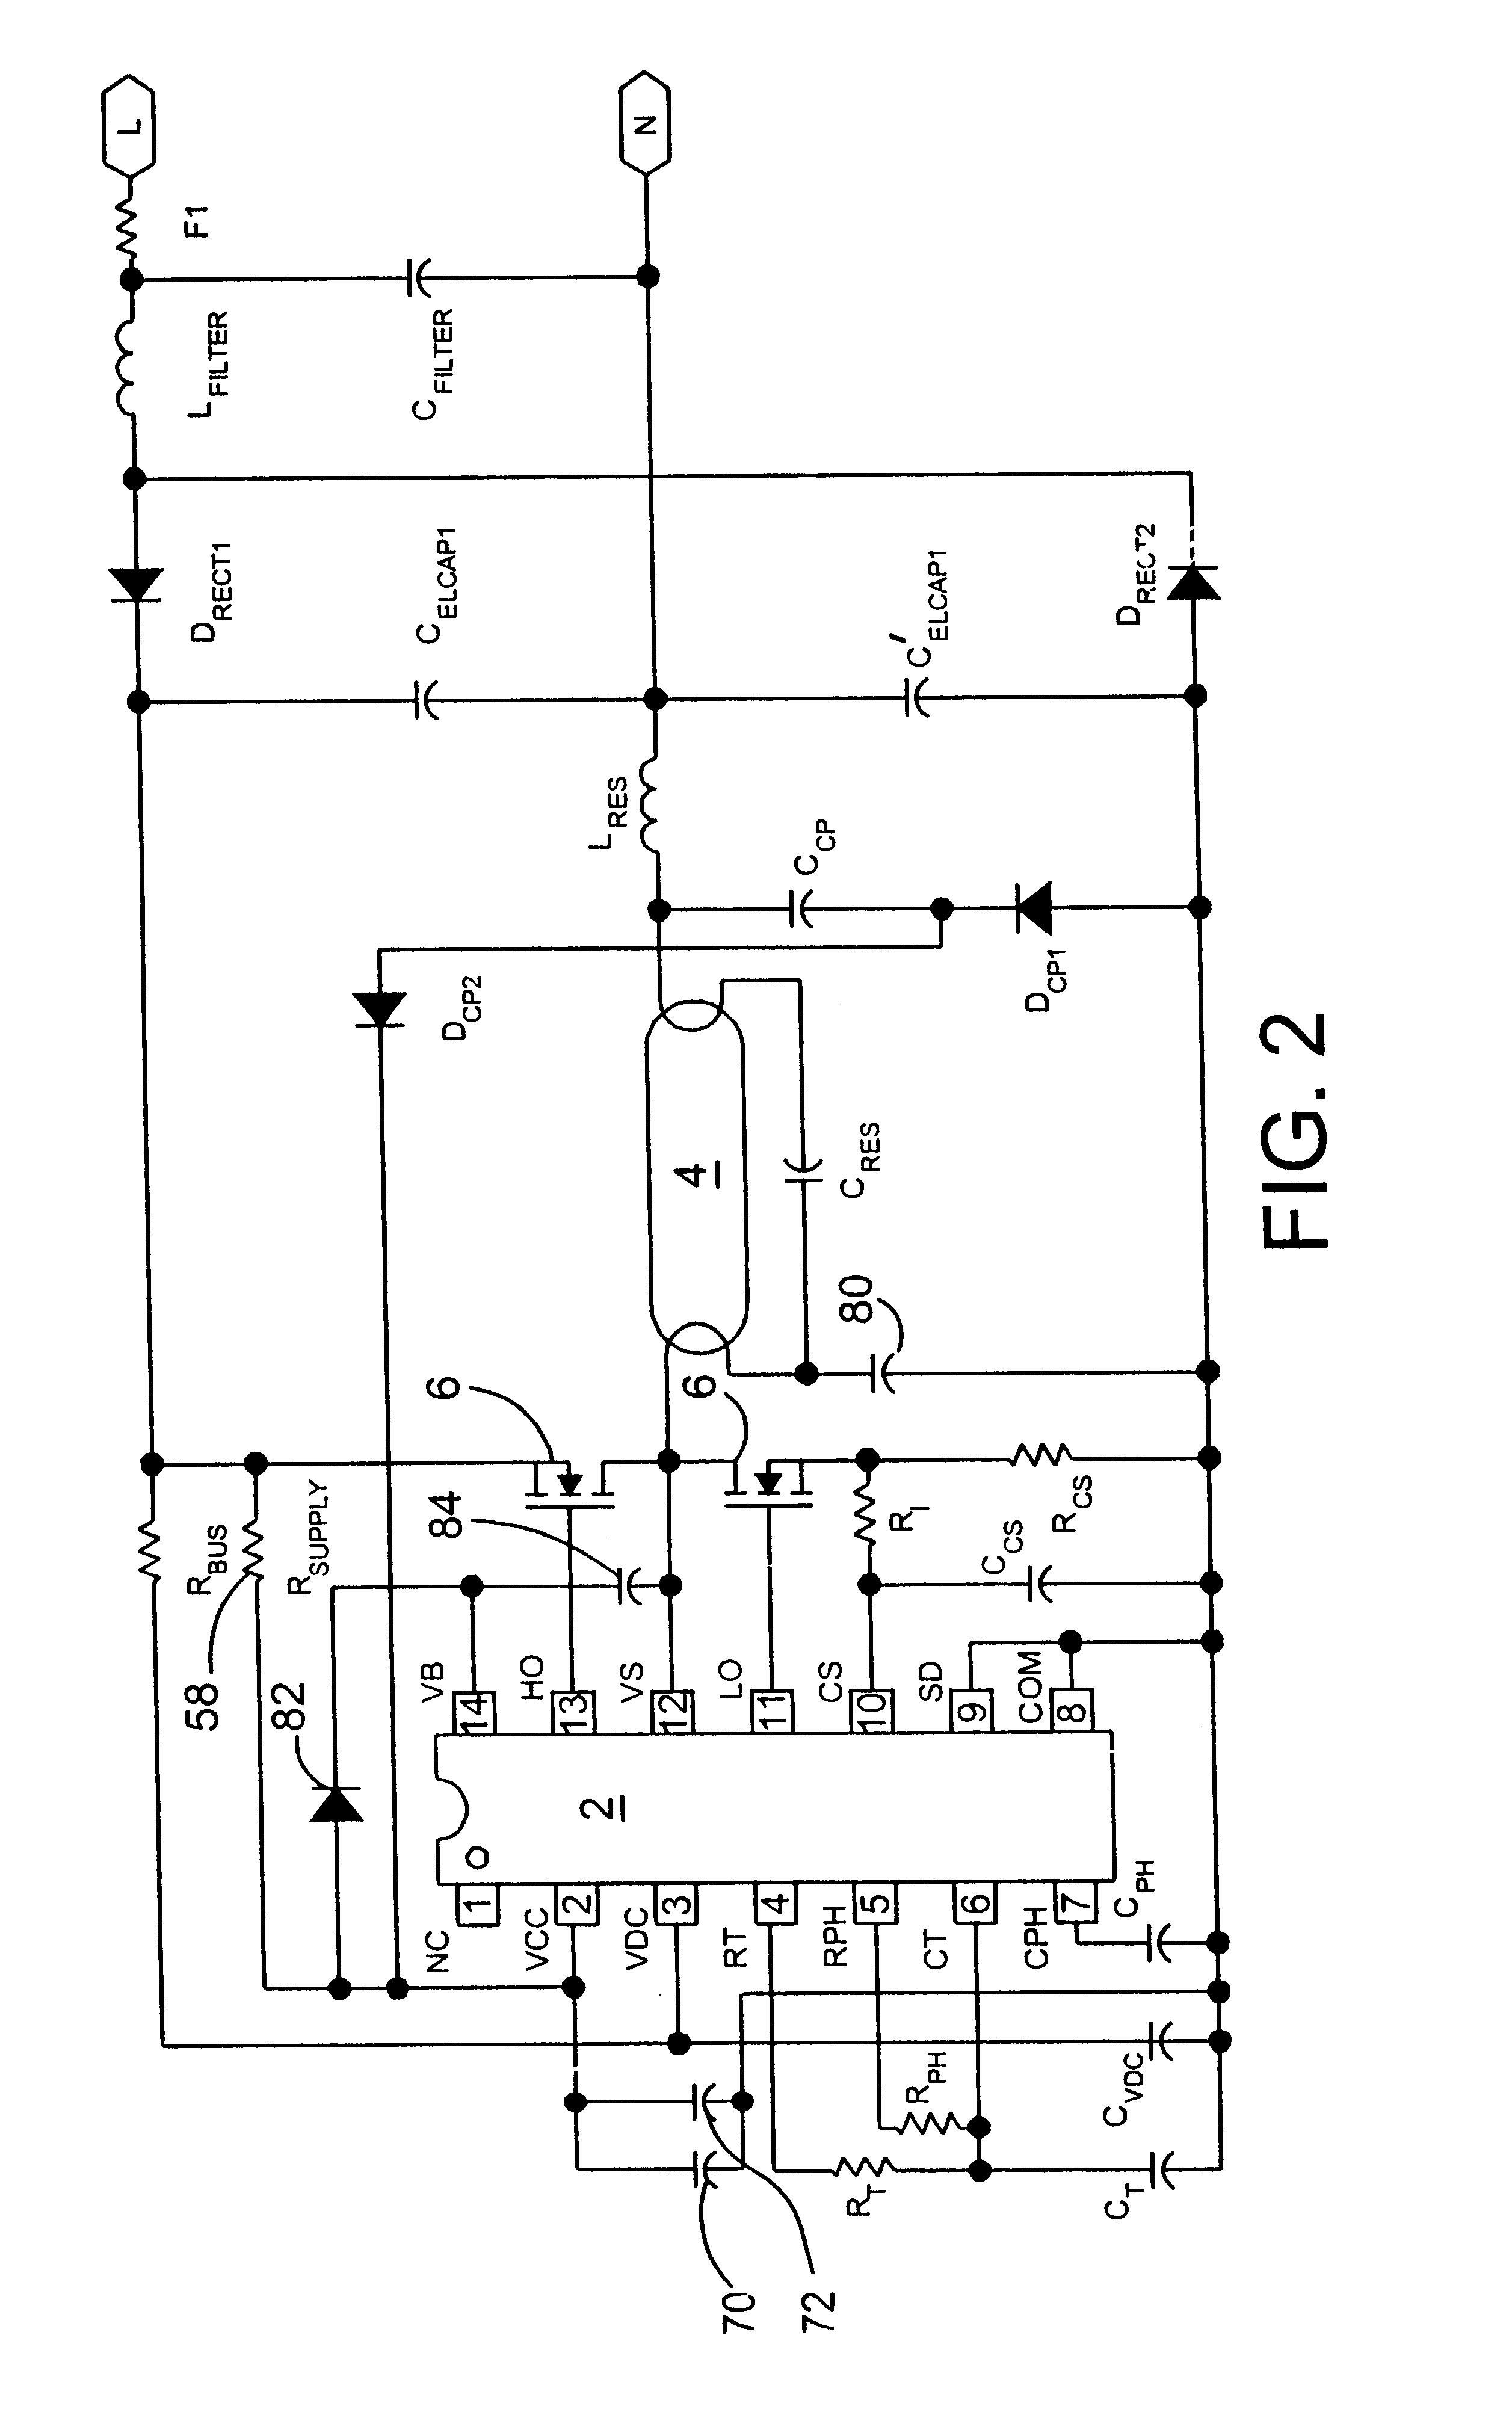 Ballast control IC with minimal internal and external components